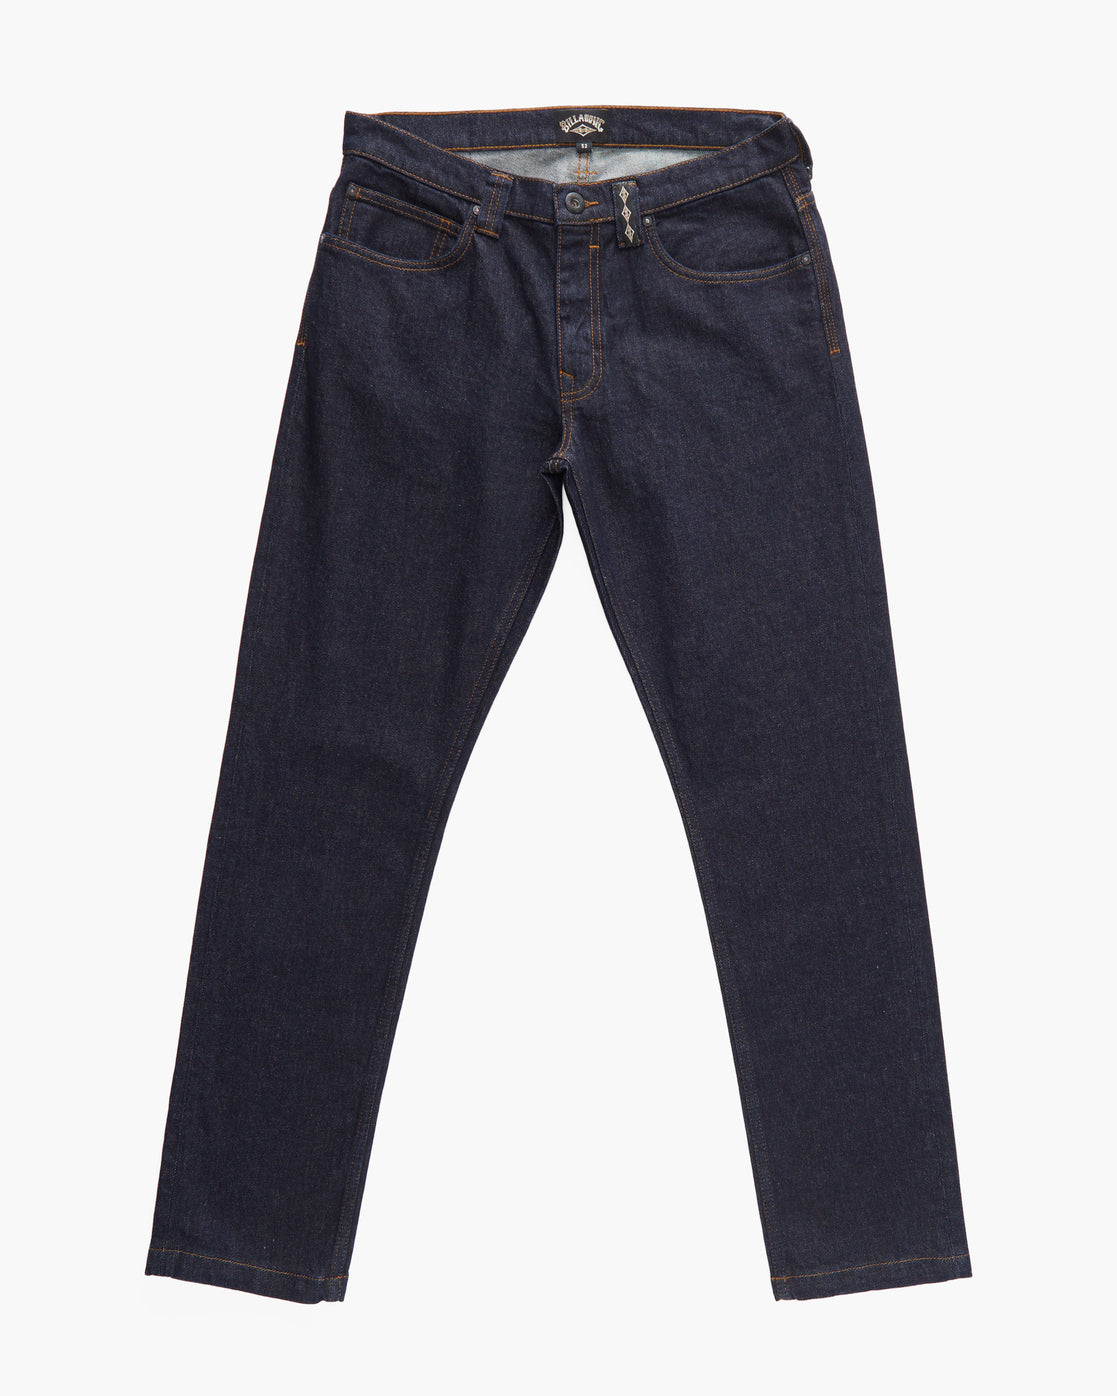 The Best Travel Jeans for Men | Japanese Twill | Made in the USA - Aviator